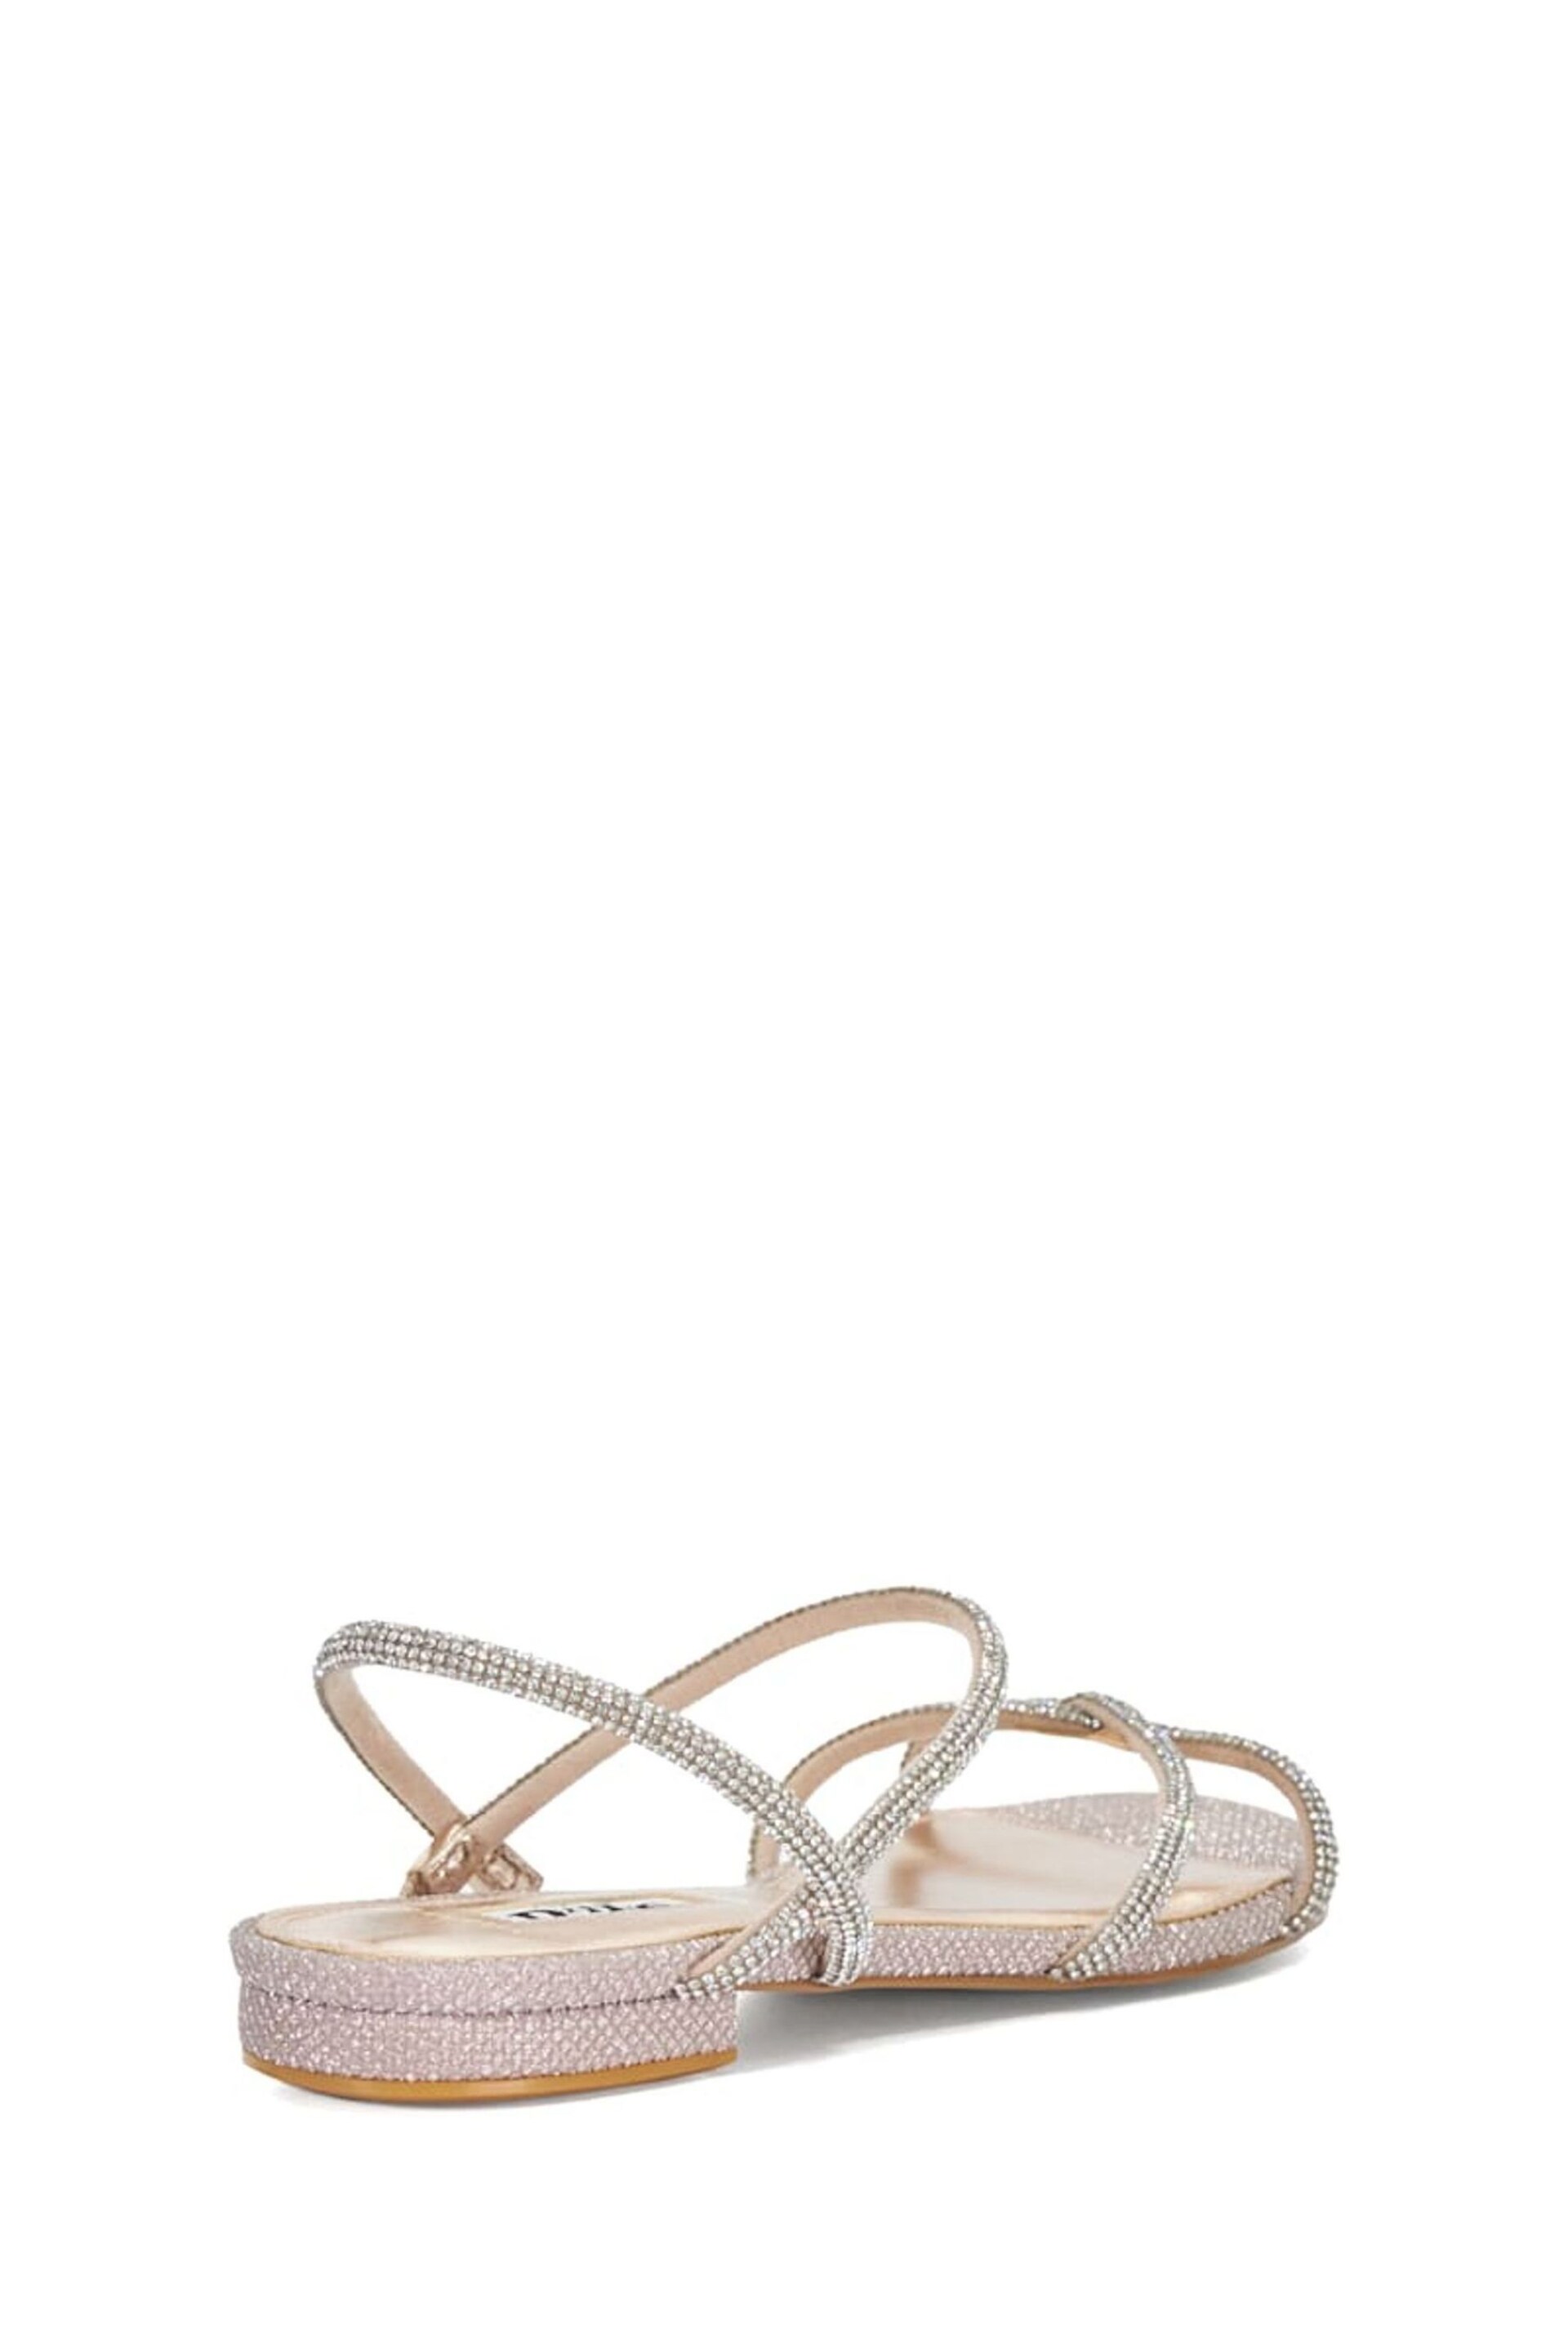 Dune London Natural Wide Fit Nightengale Embellished Flat Sandals - Image 5 of 7